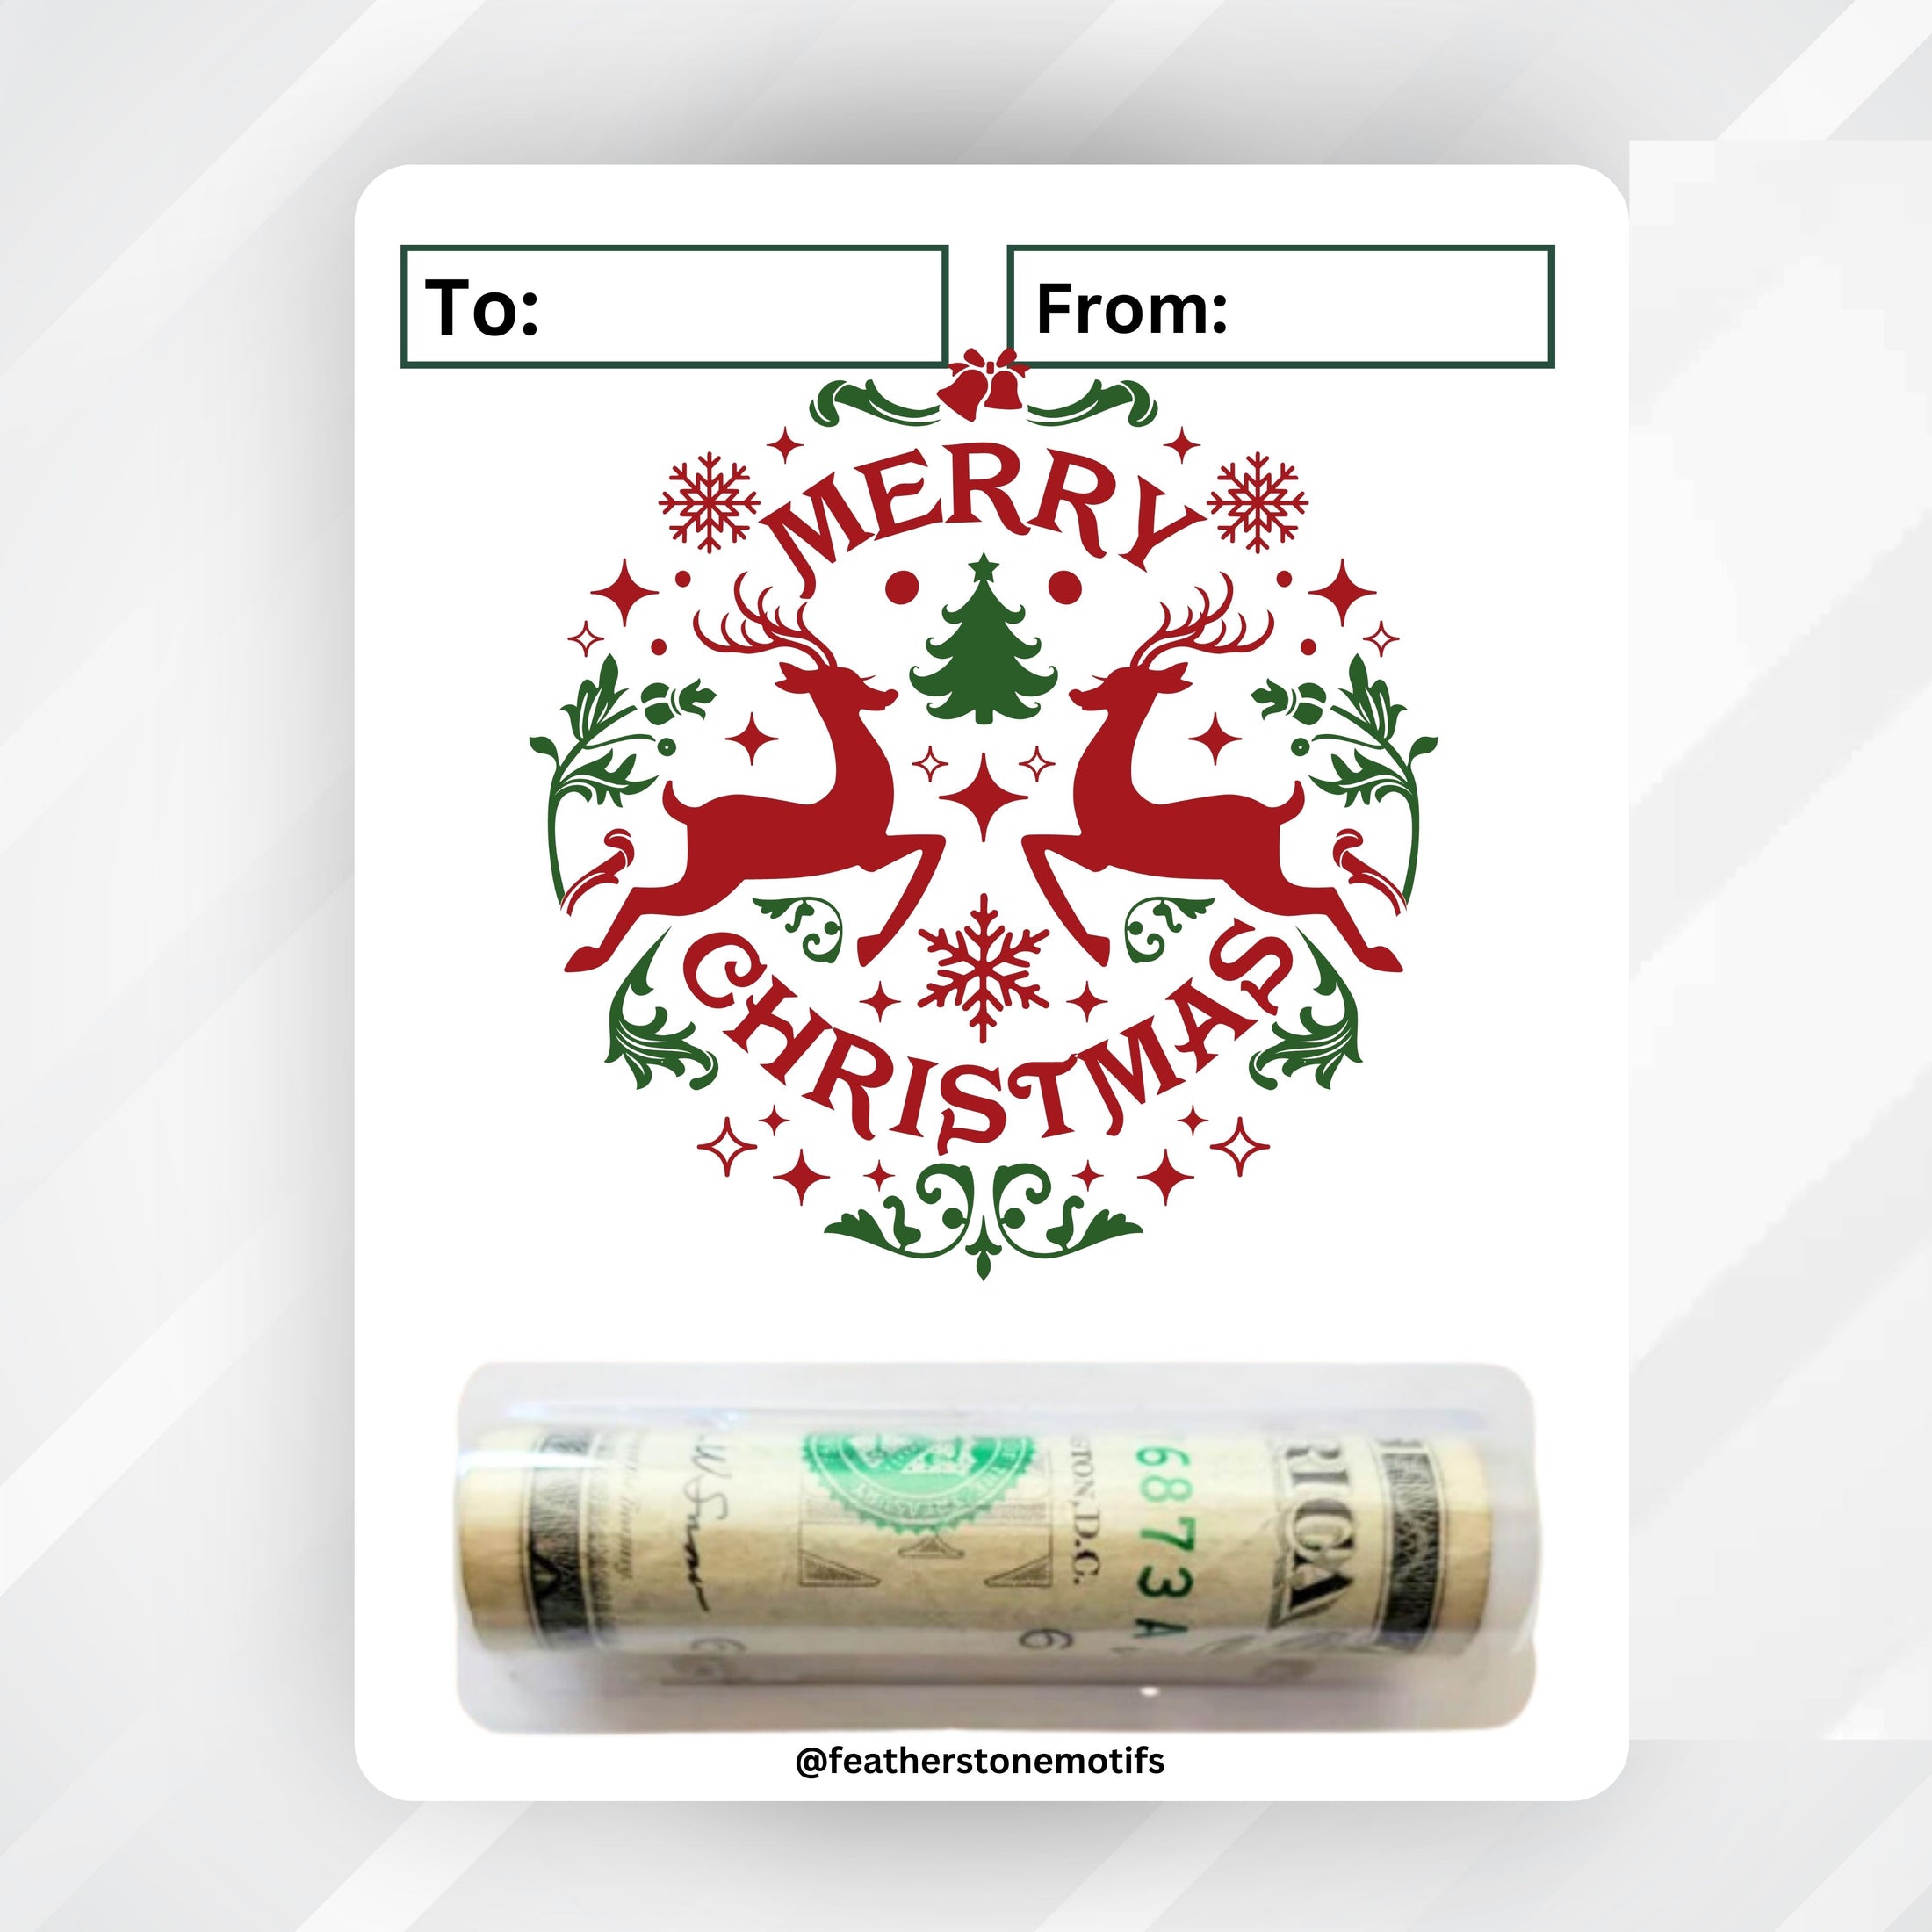 This image shows the money tube attached to the Christmas Deer money card.